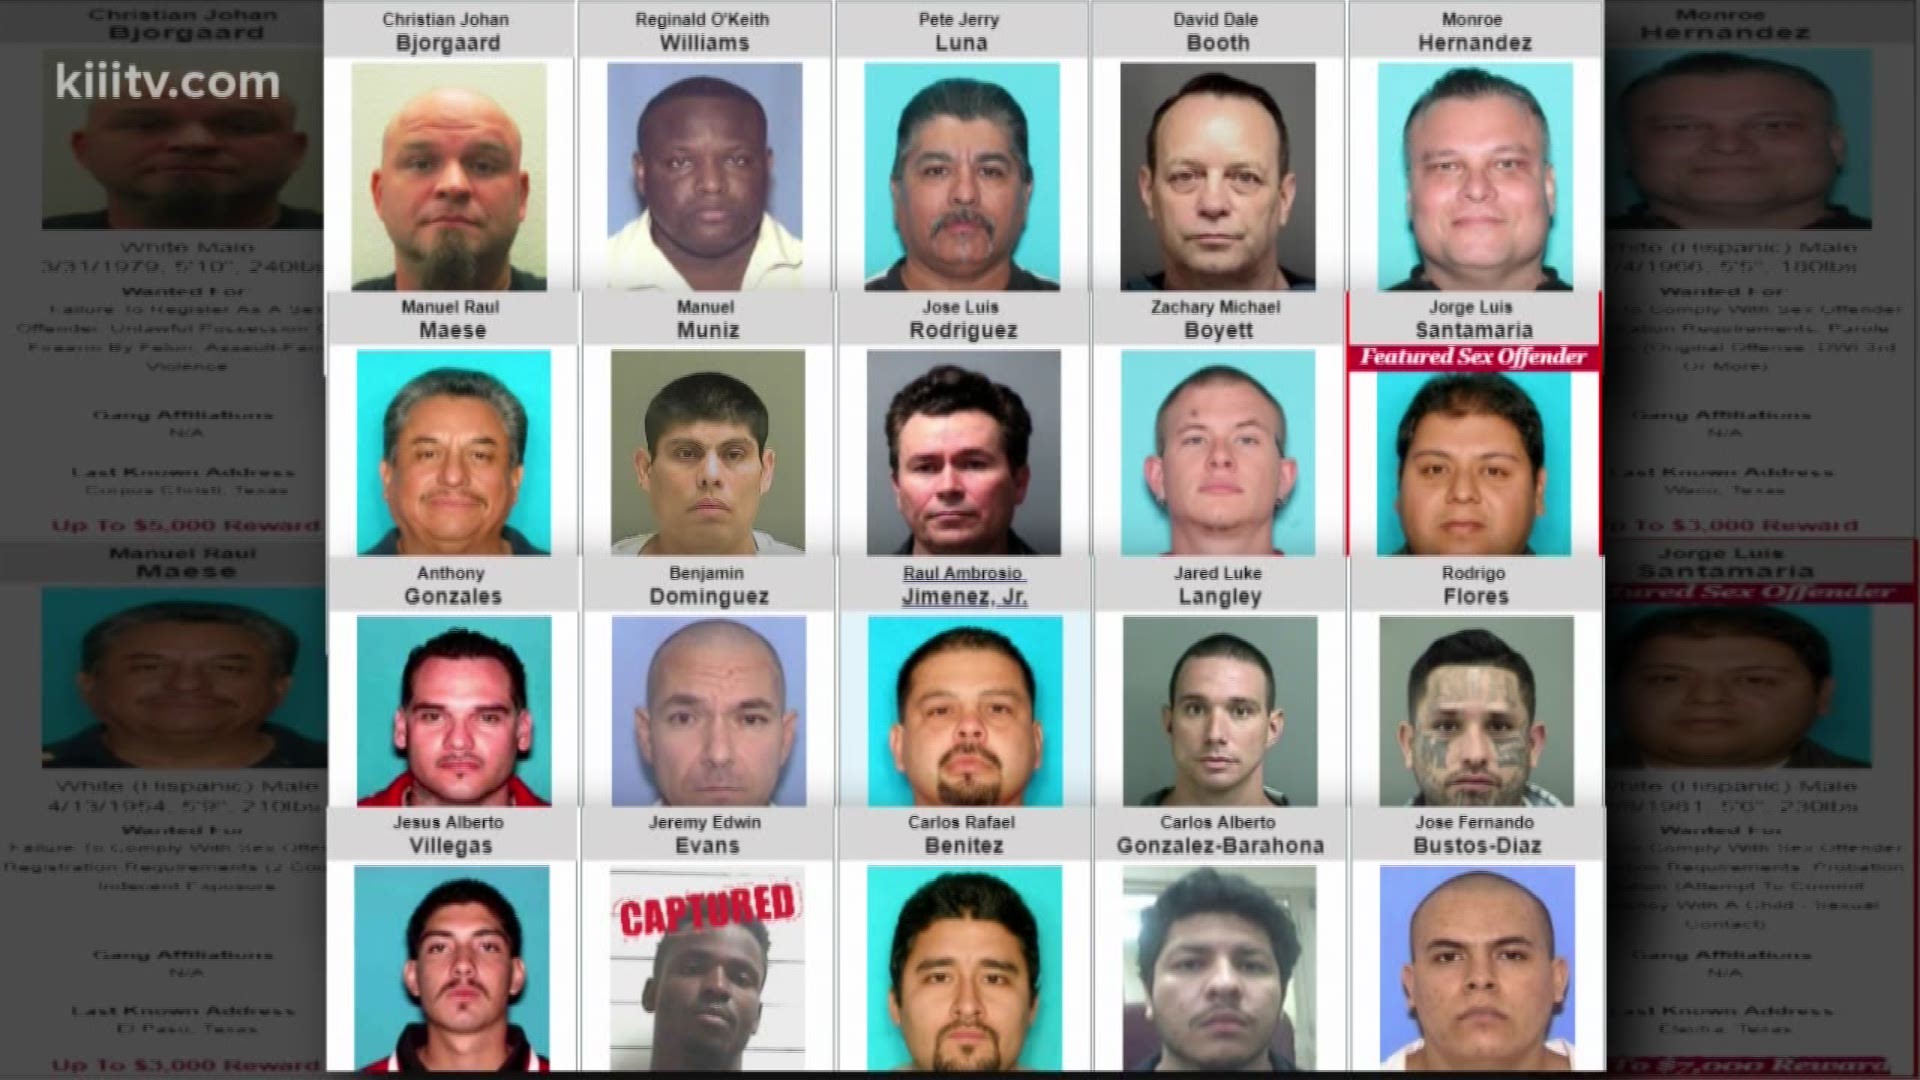 The Texas Department of Public Safety is asking for your help locating the Top 10 Most Wanted fugitives and sex offenders in the state.